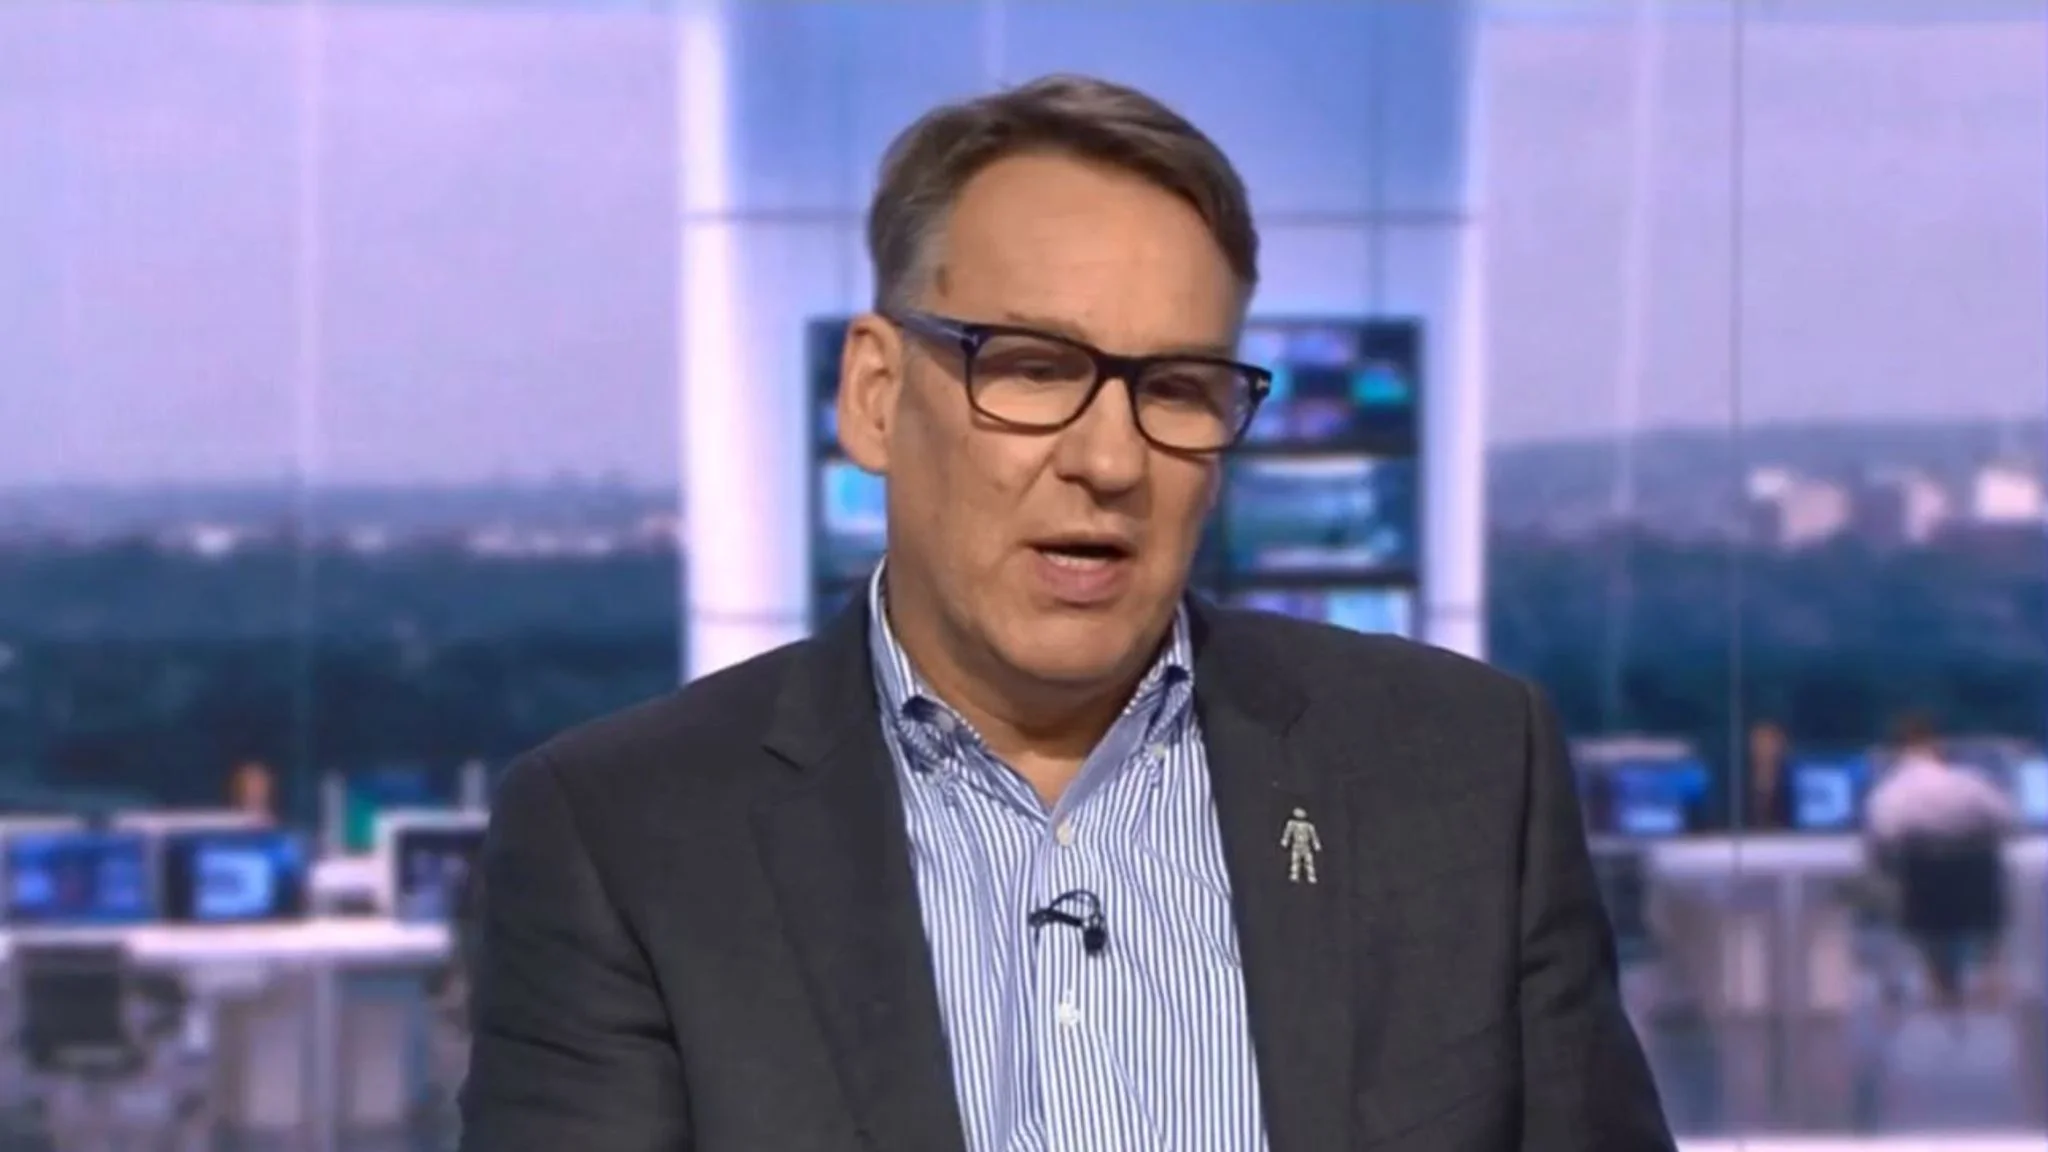 Euro 2024: I don’t see him making England squad – Merson on Chelsea star